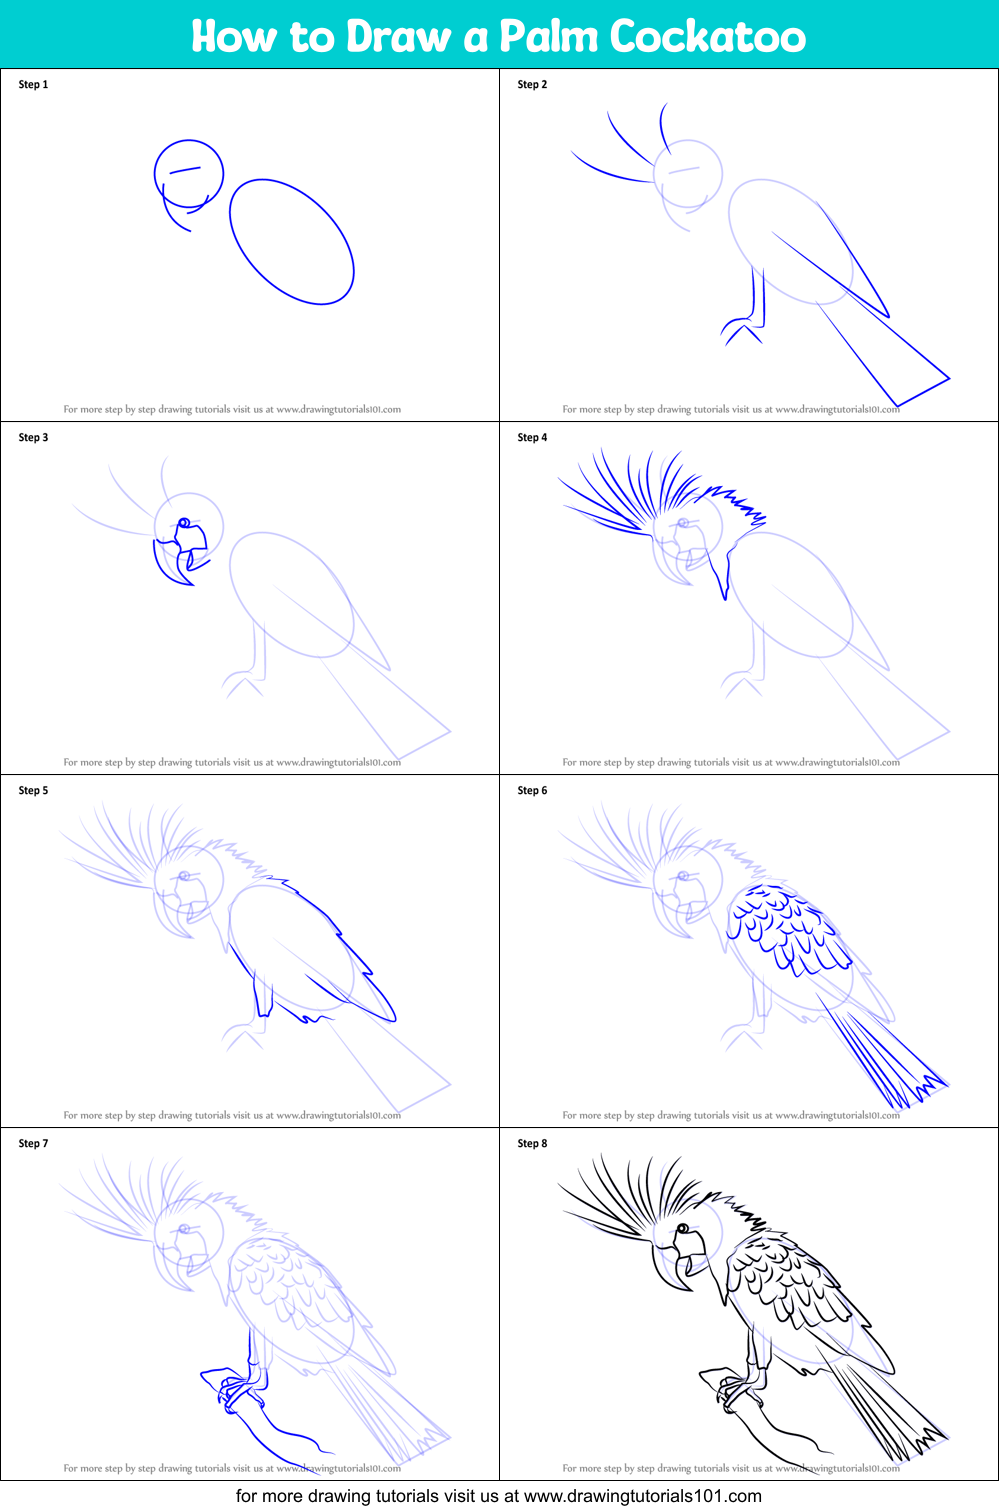 How To Draw A Palm Cockatoo Printable Step By Step Drawing Sheet